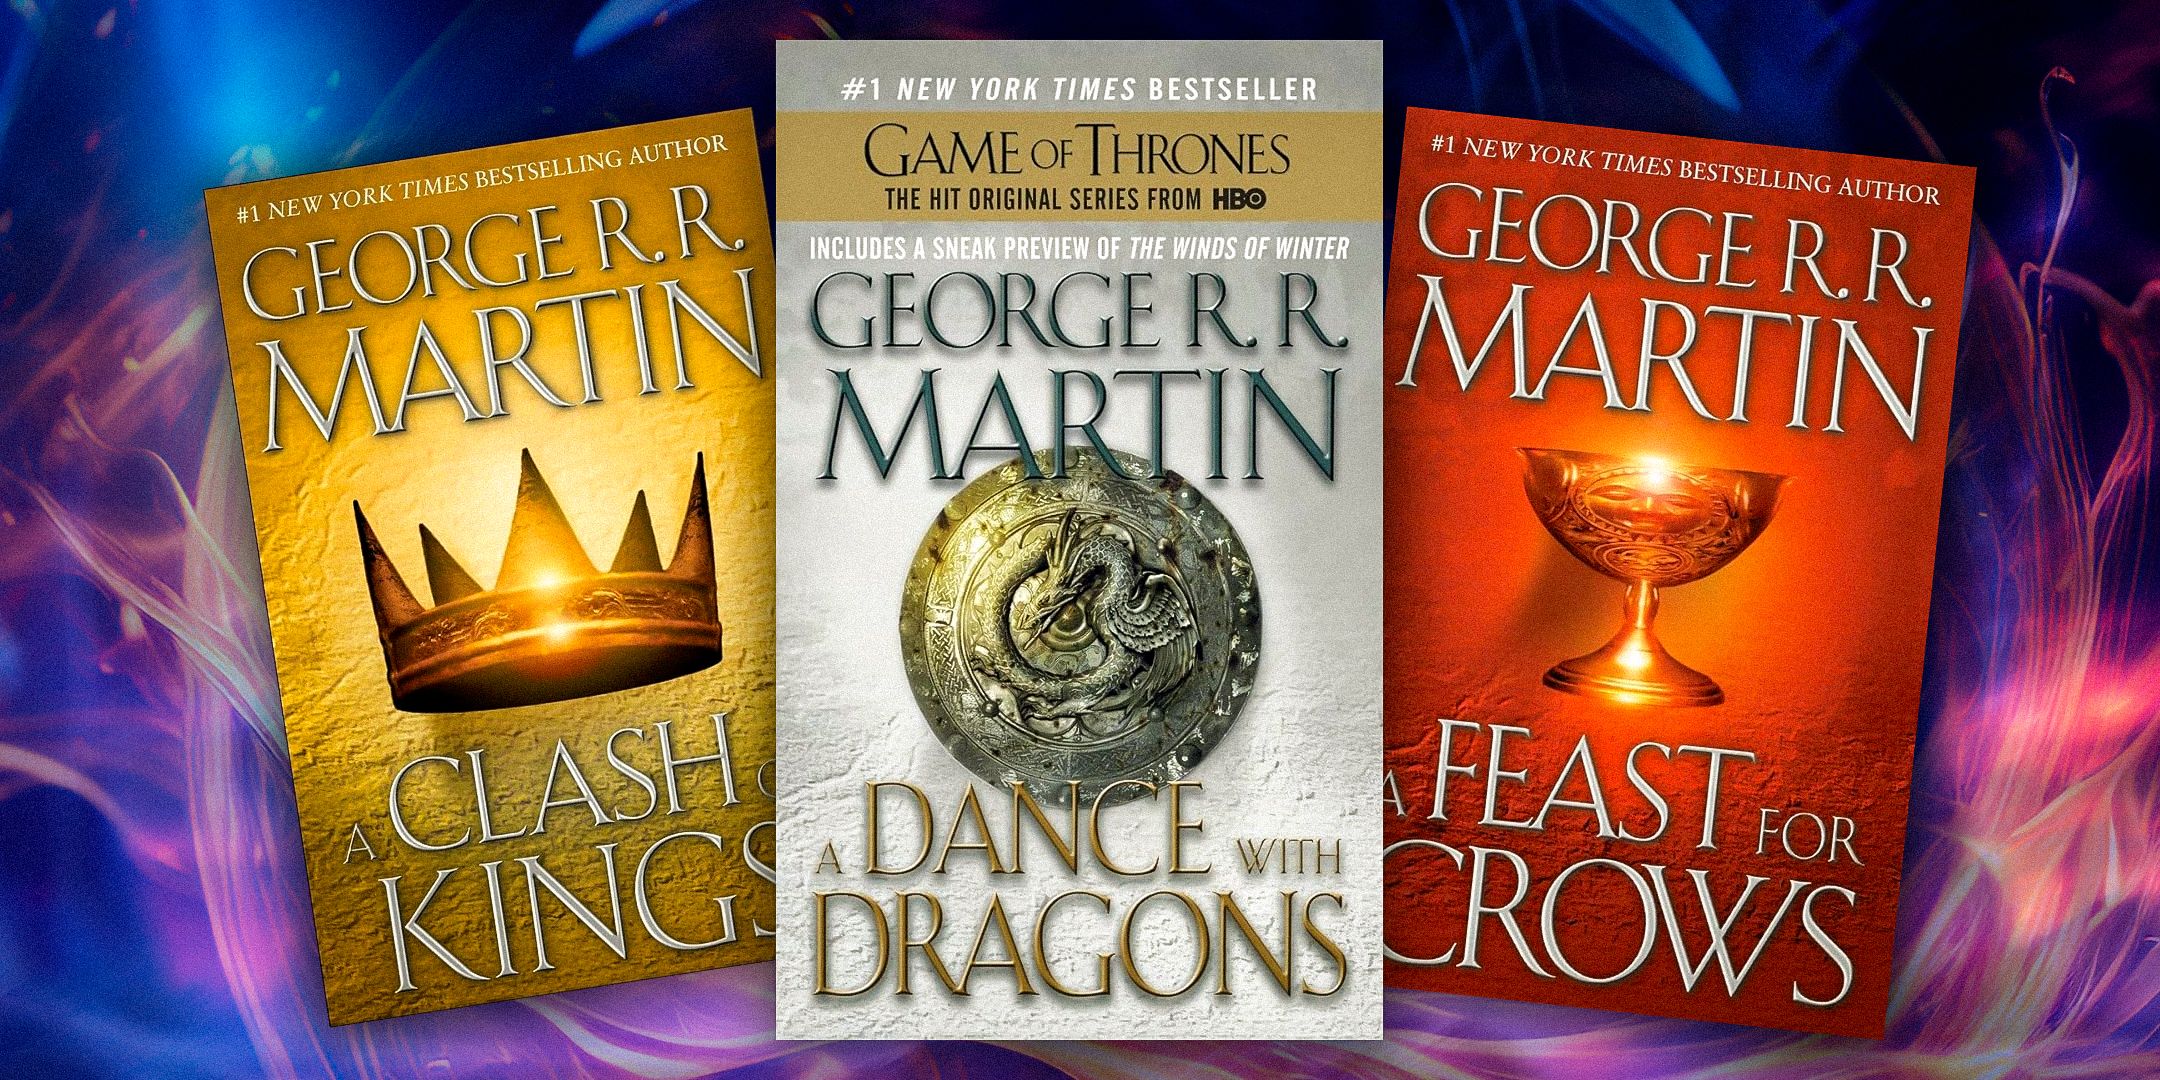 A Song of Ice & Fire book covers